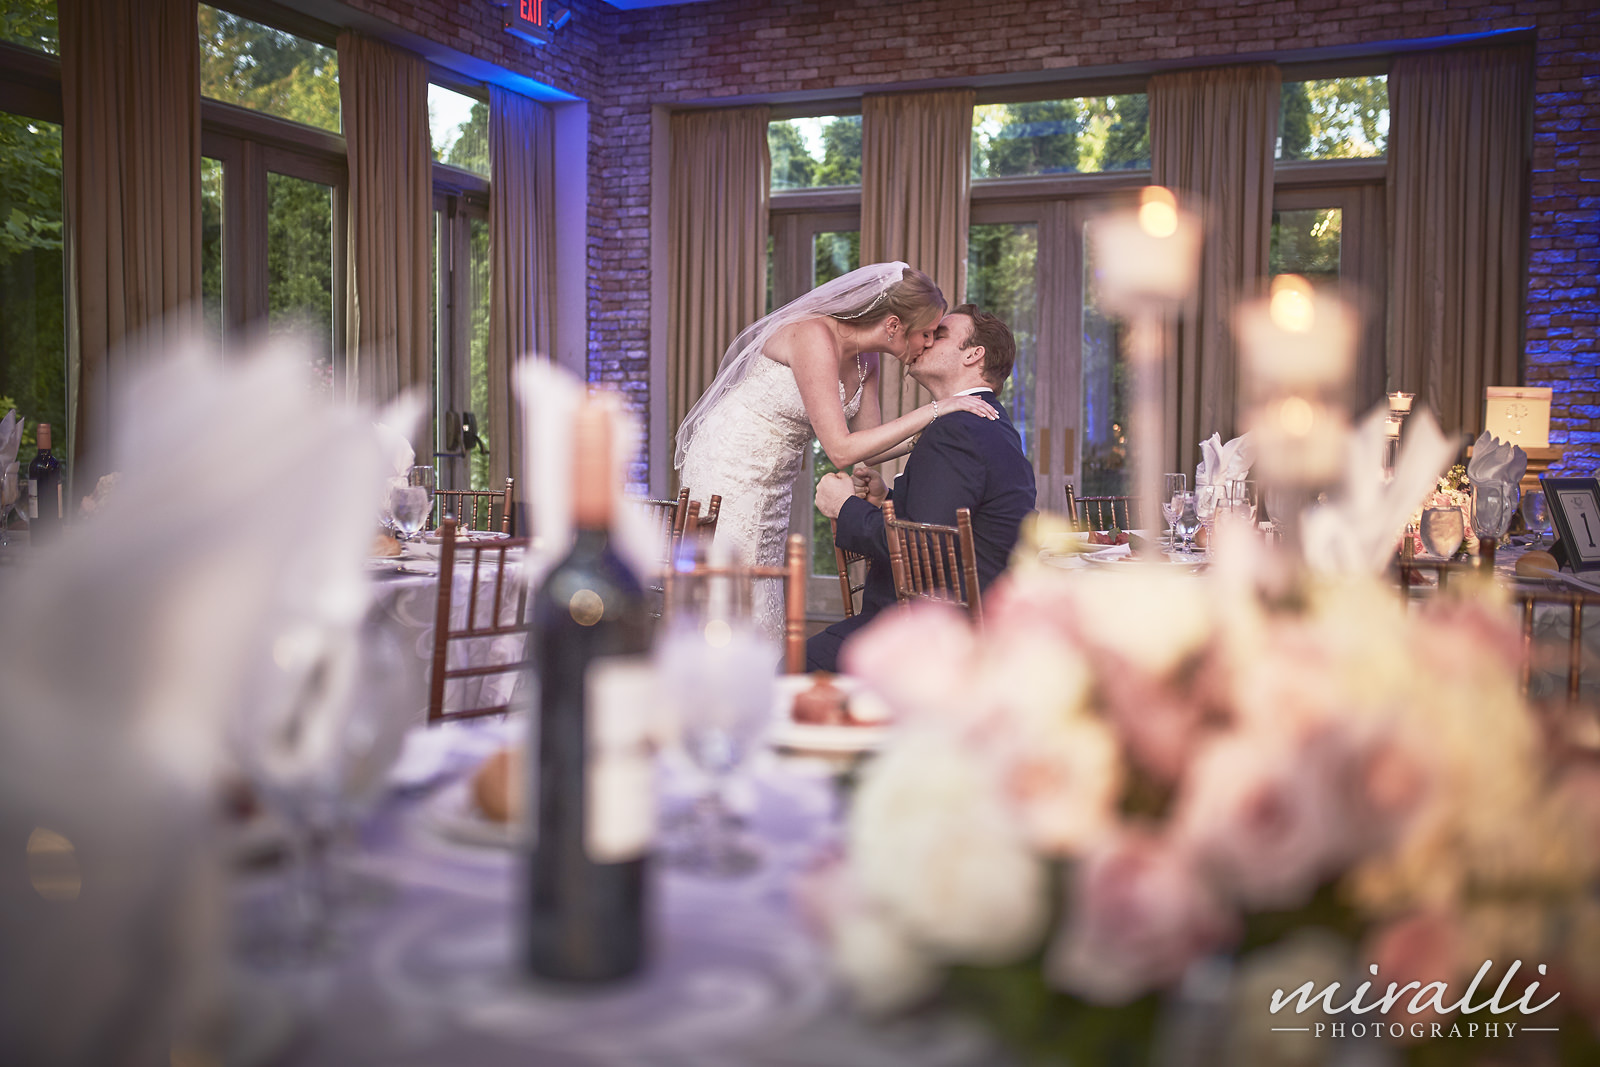 The Somerly at Fox Hollow Wedding Photos by Miralli Photography